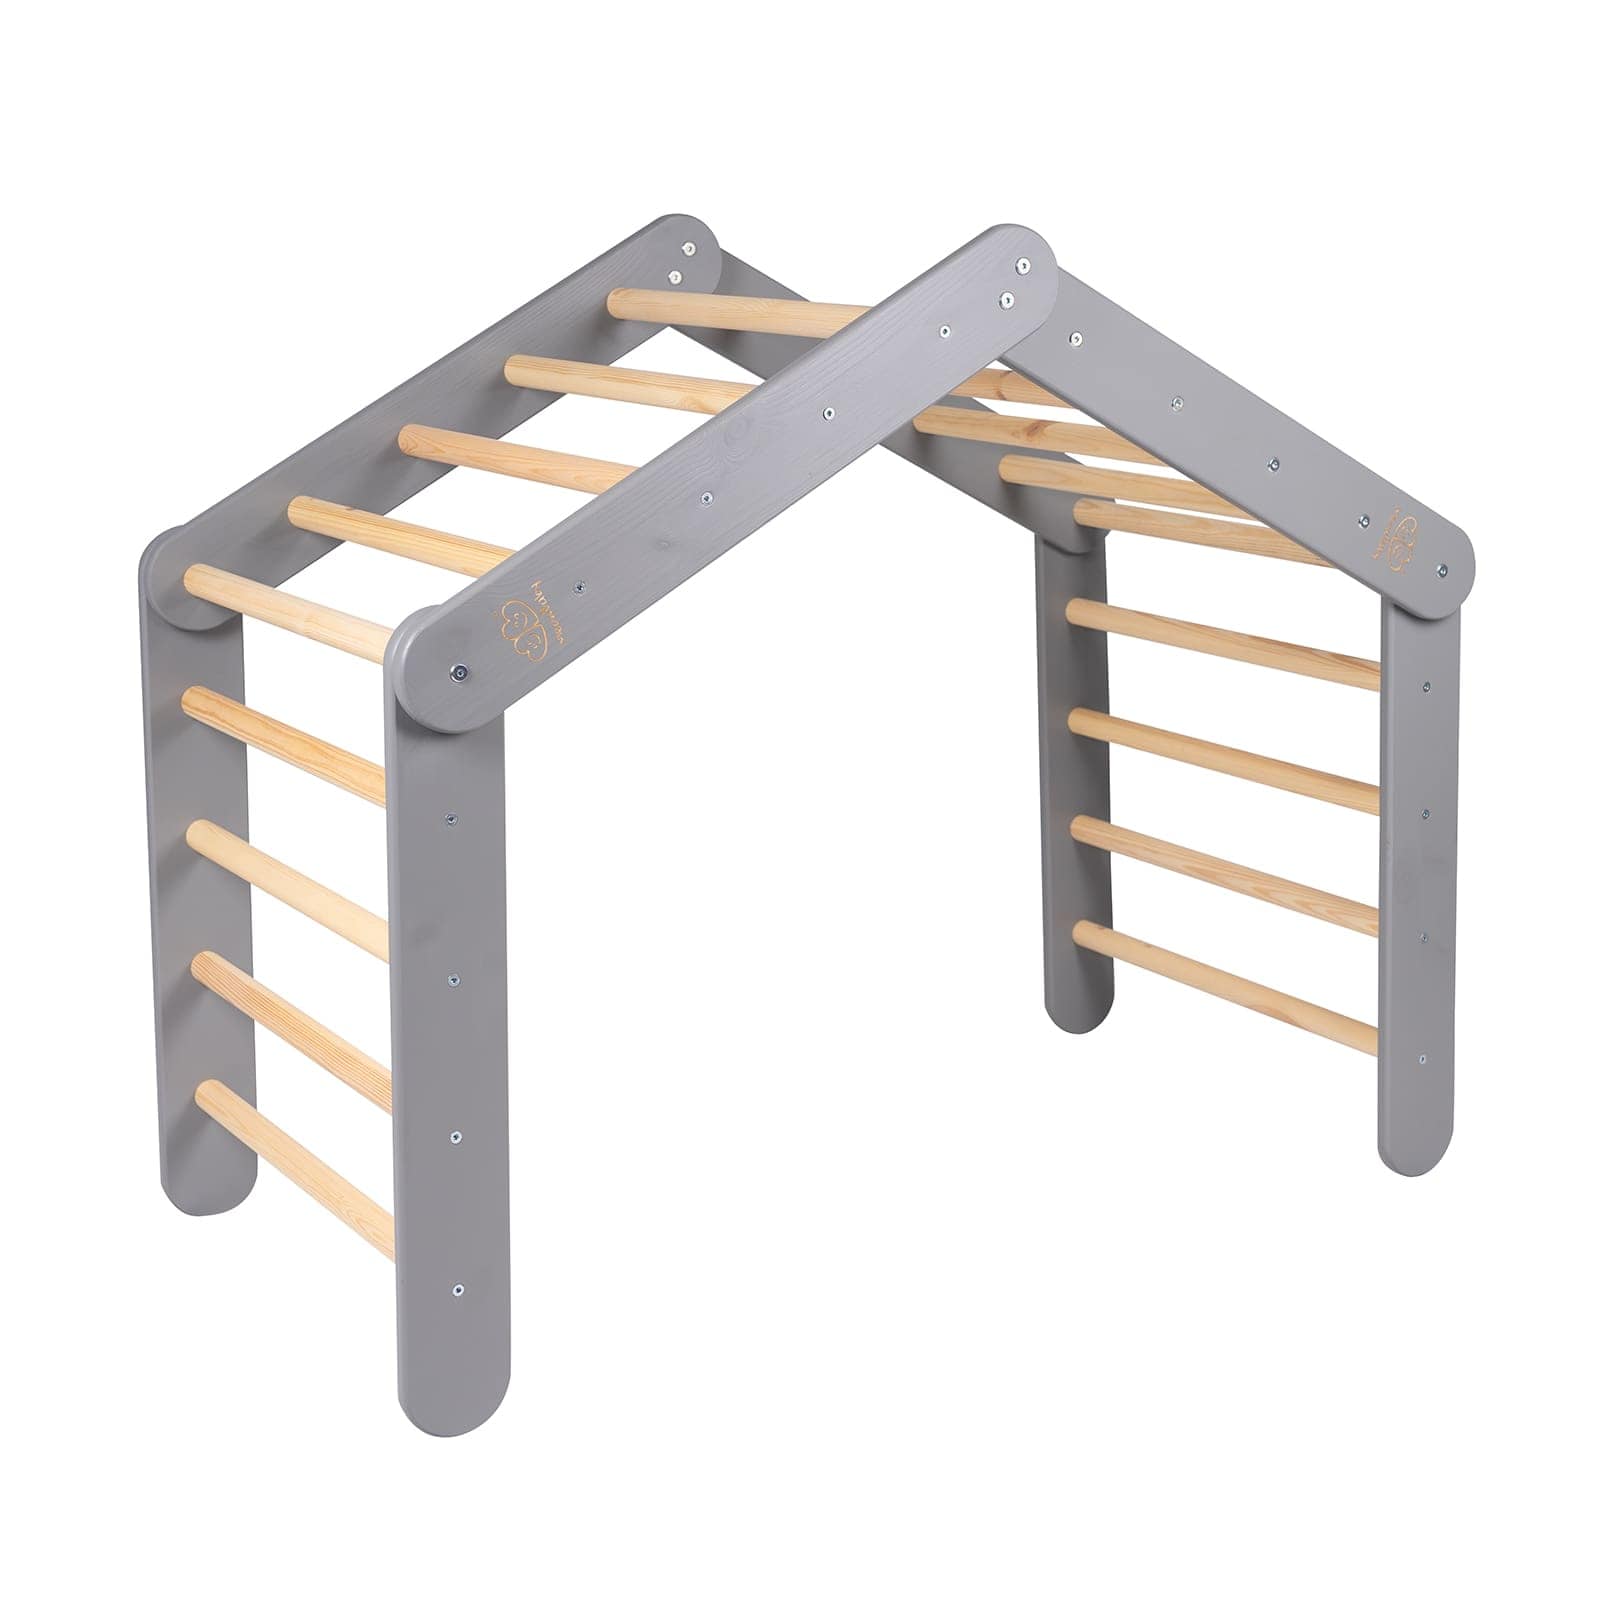 Wooden Pikler Large Climbing Triangle For Kids By MeowBaby - Stylemykid.com